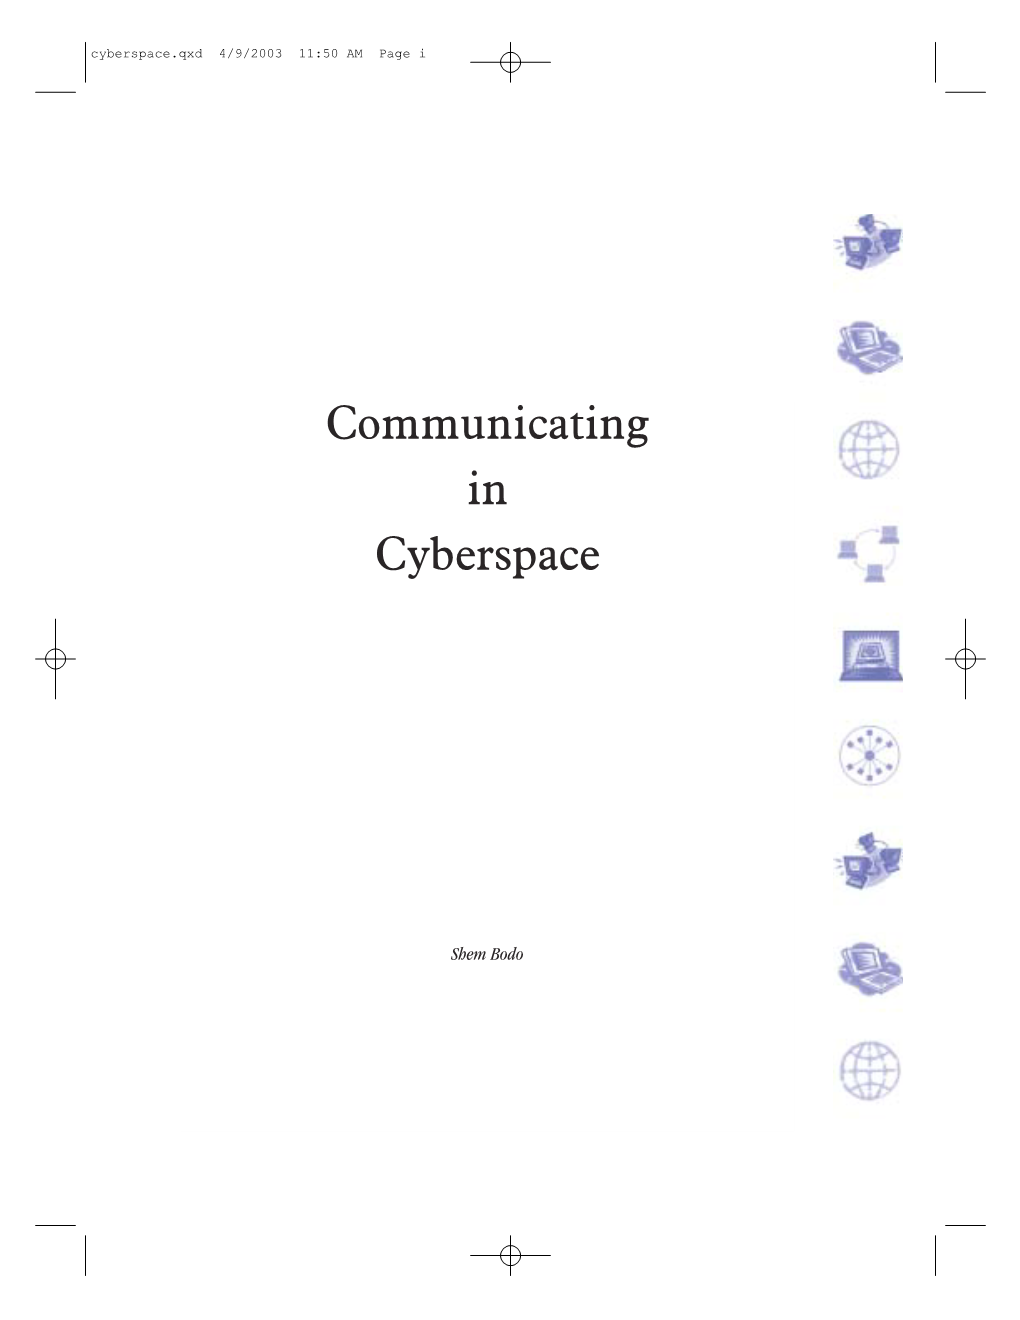 Communicating in Cyberspace